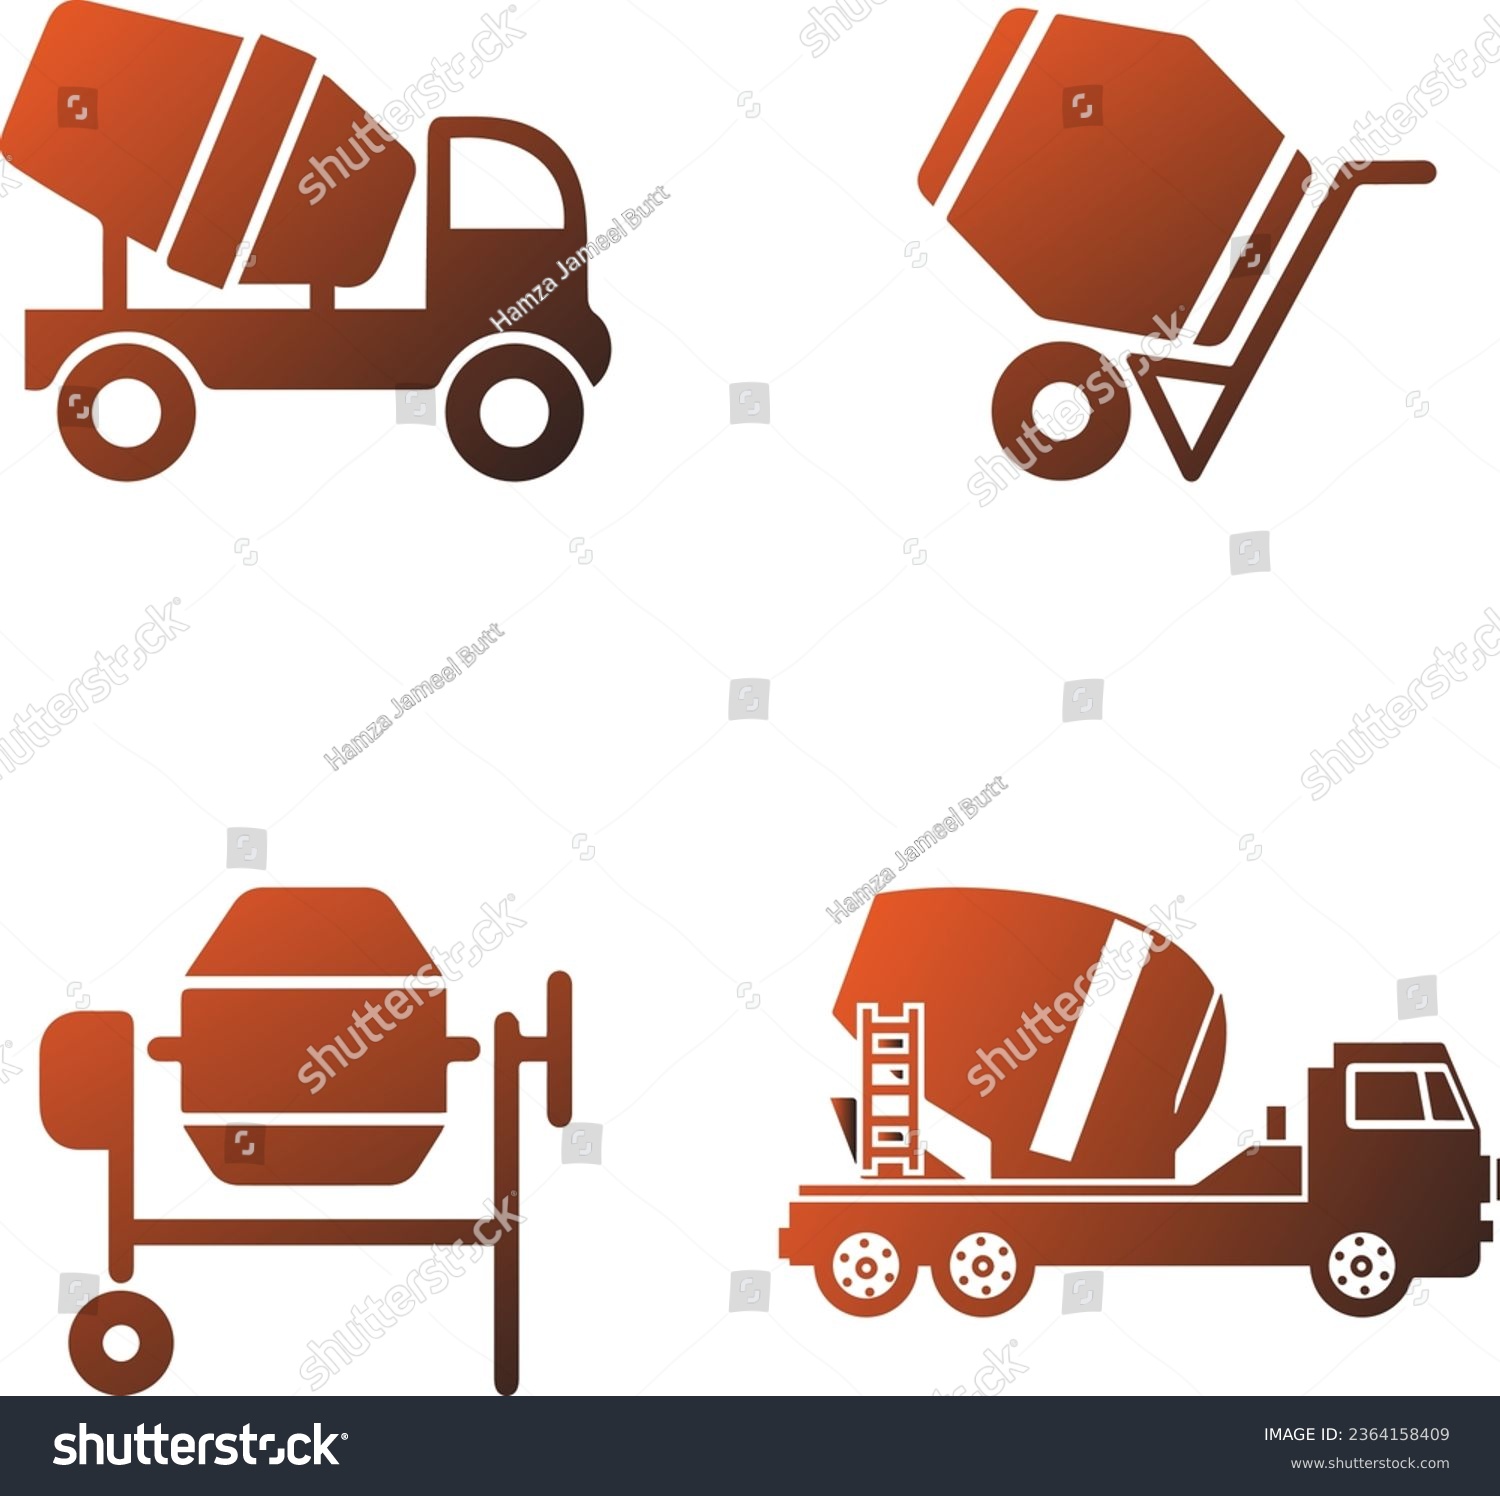 SVG of Cement Mixer Icons - These icons depict cement mixers in various styles and angles. 

Whether you're designing for construction-related content or DIY projects. svg